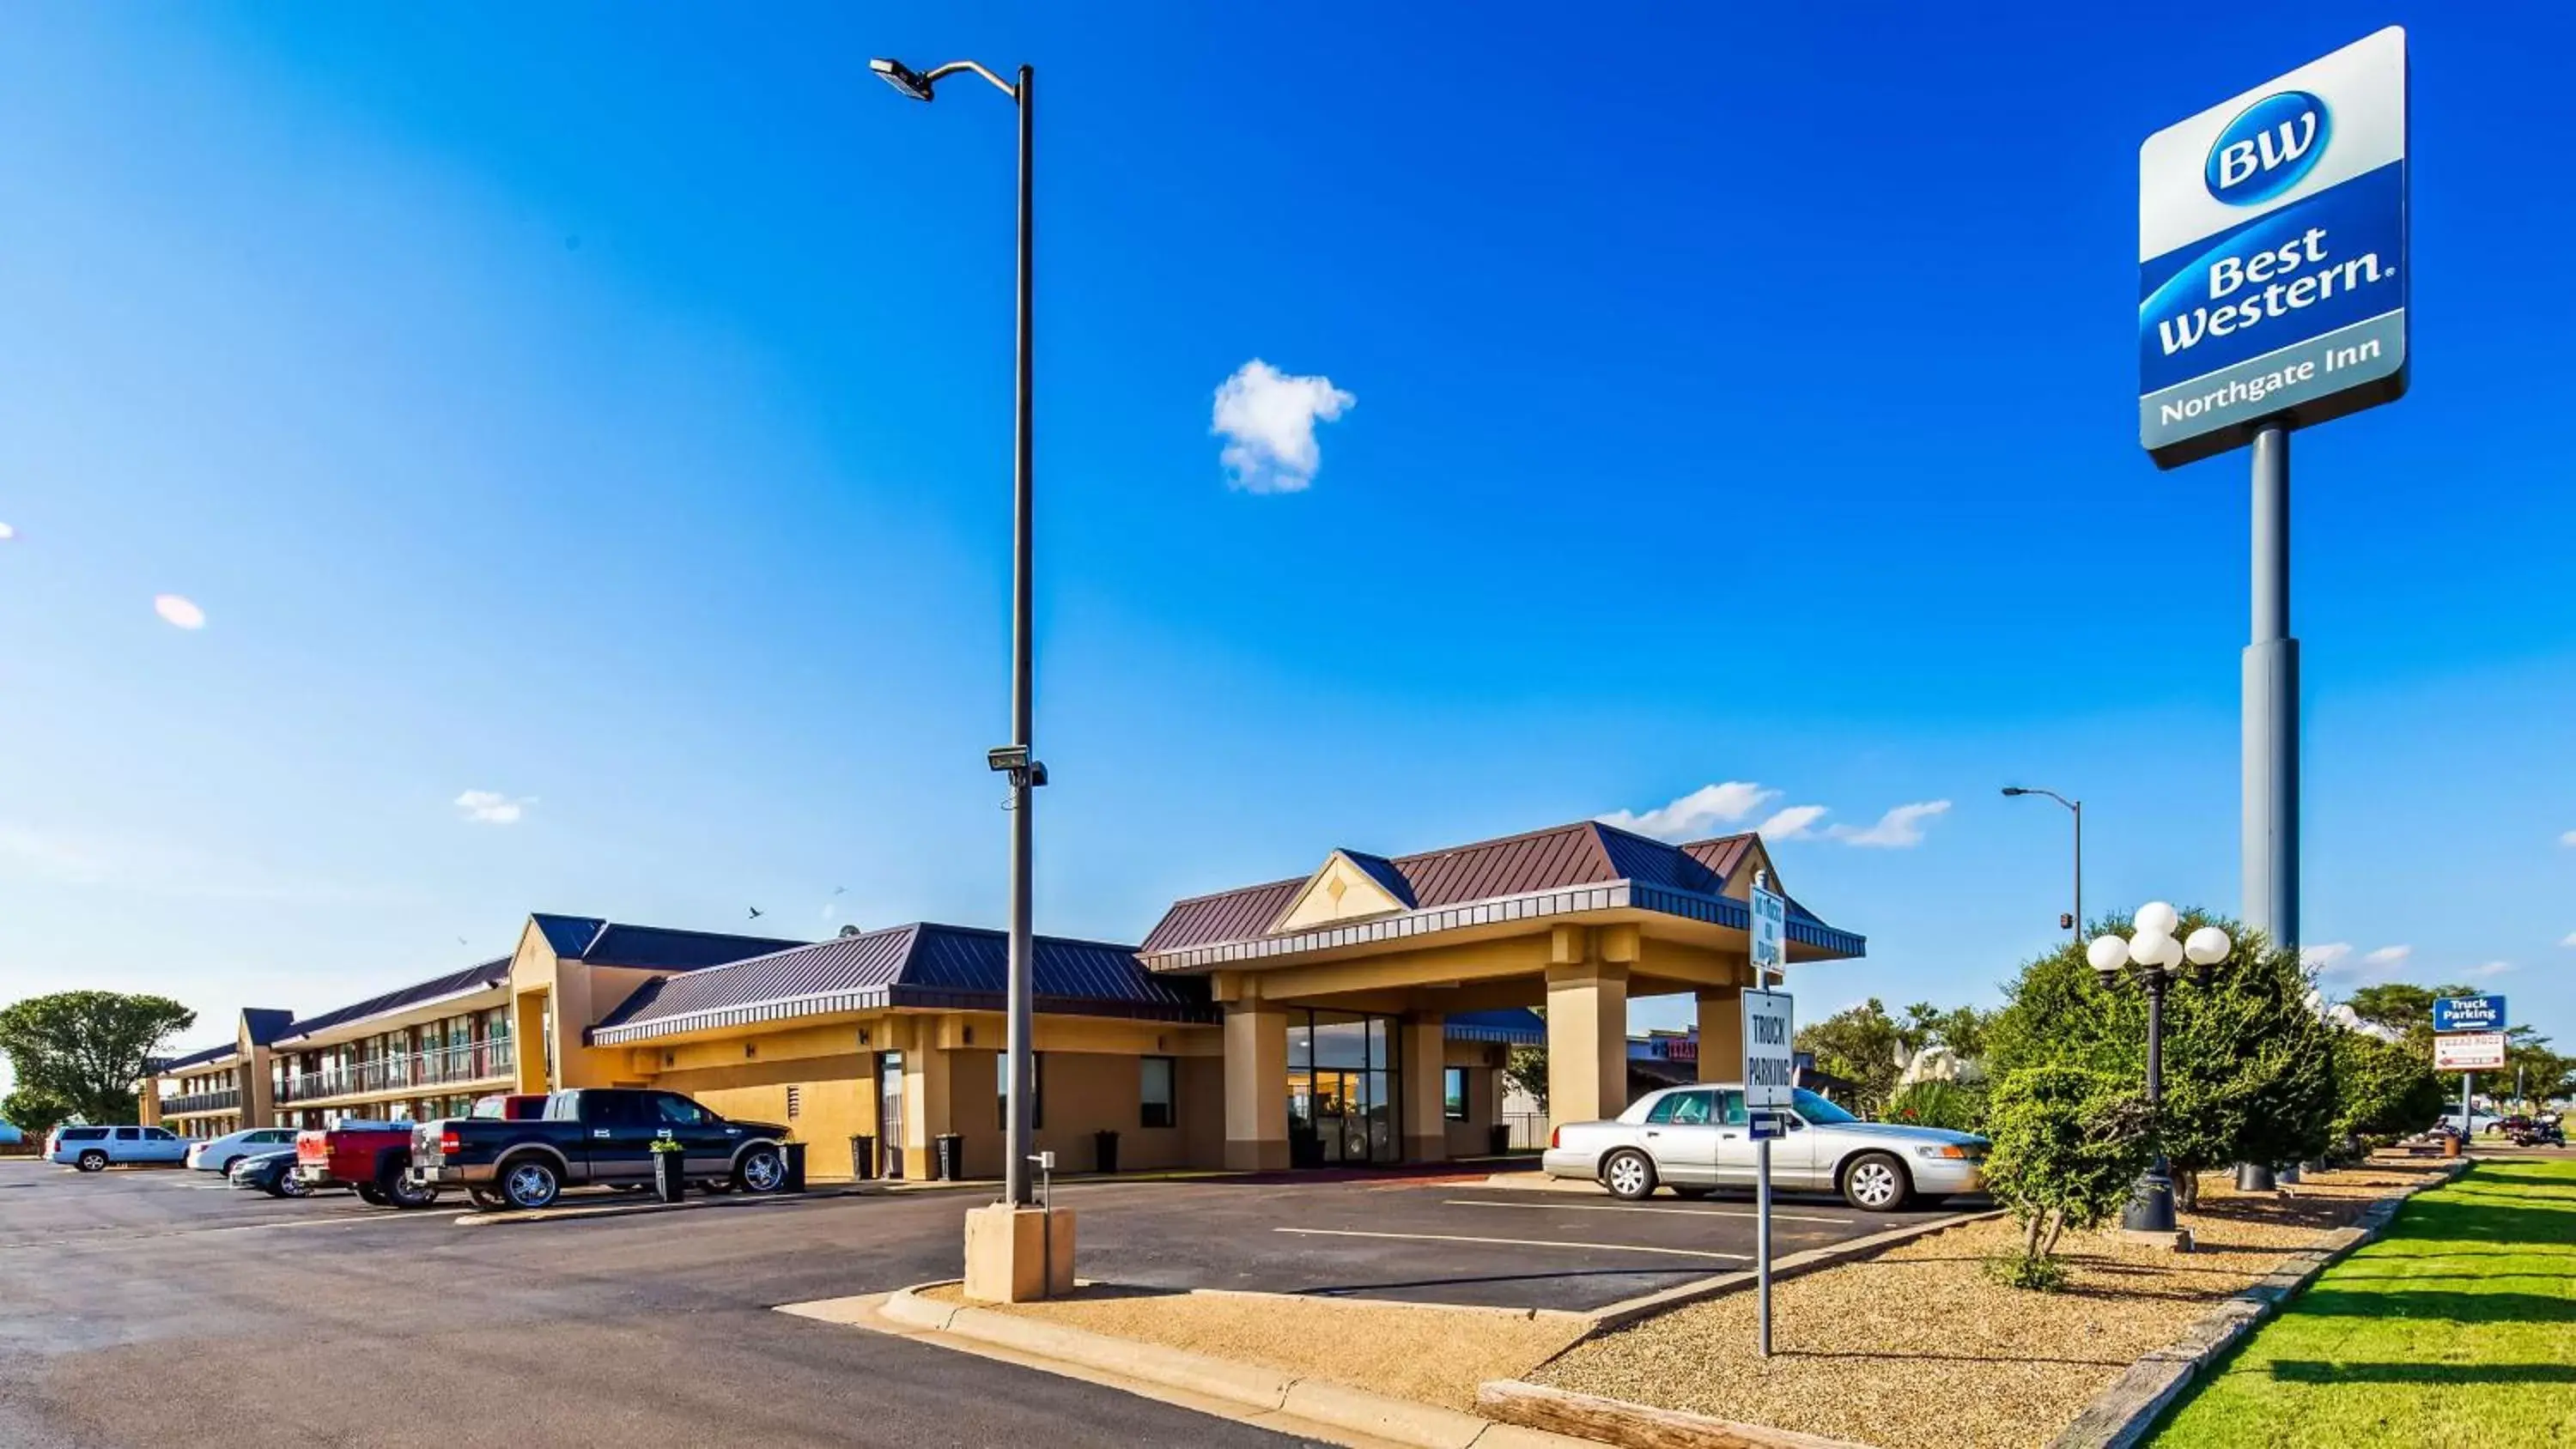 Property building in Best Western Northgate Inn Pampa